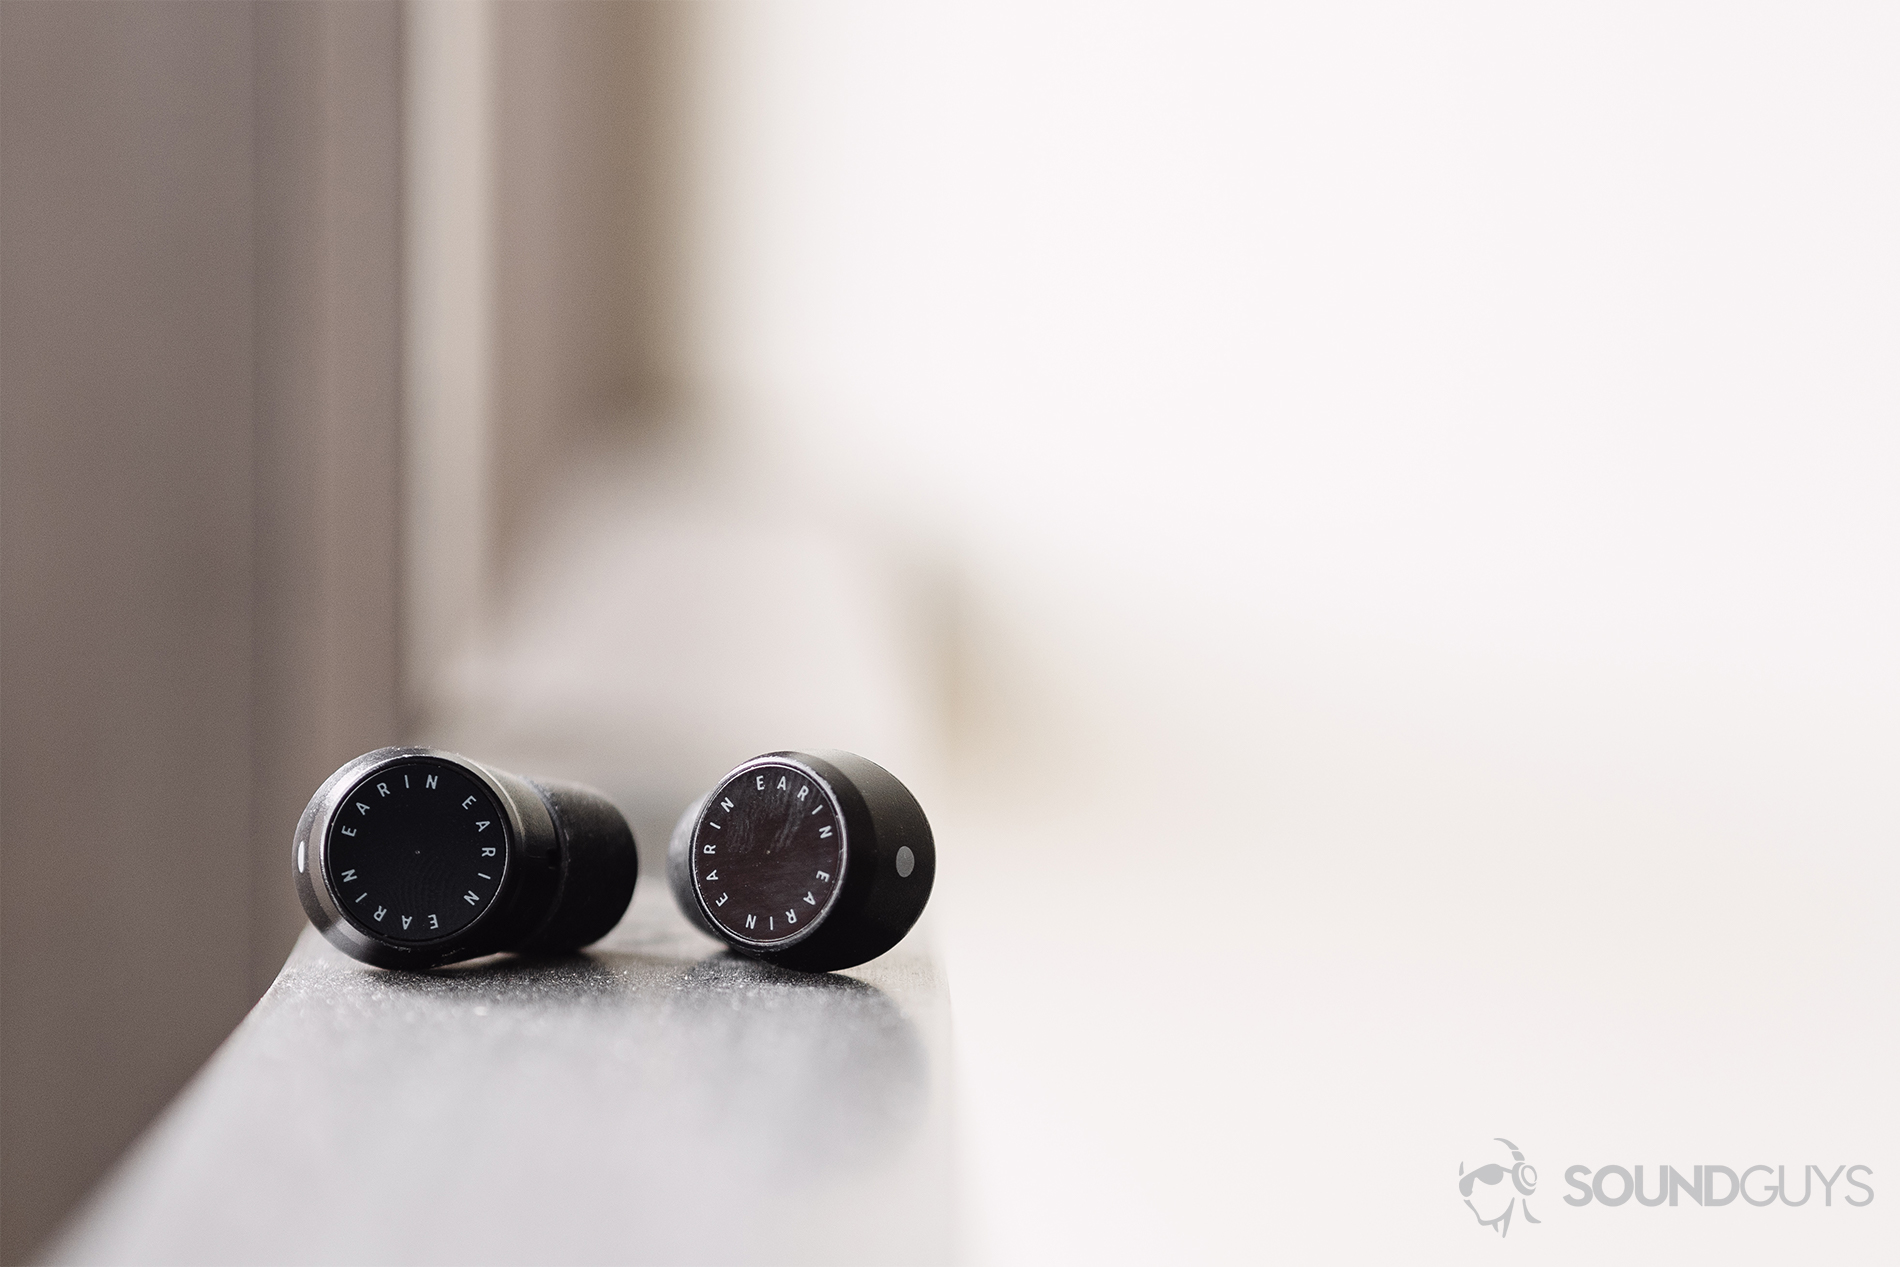 Earin M-2 review: Beaty and brains, but where's the brawn?